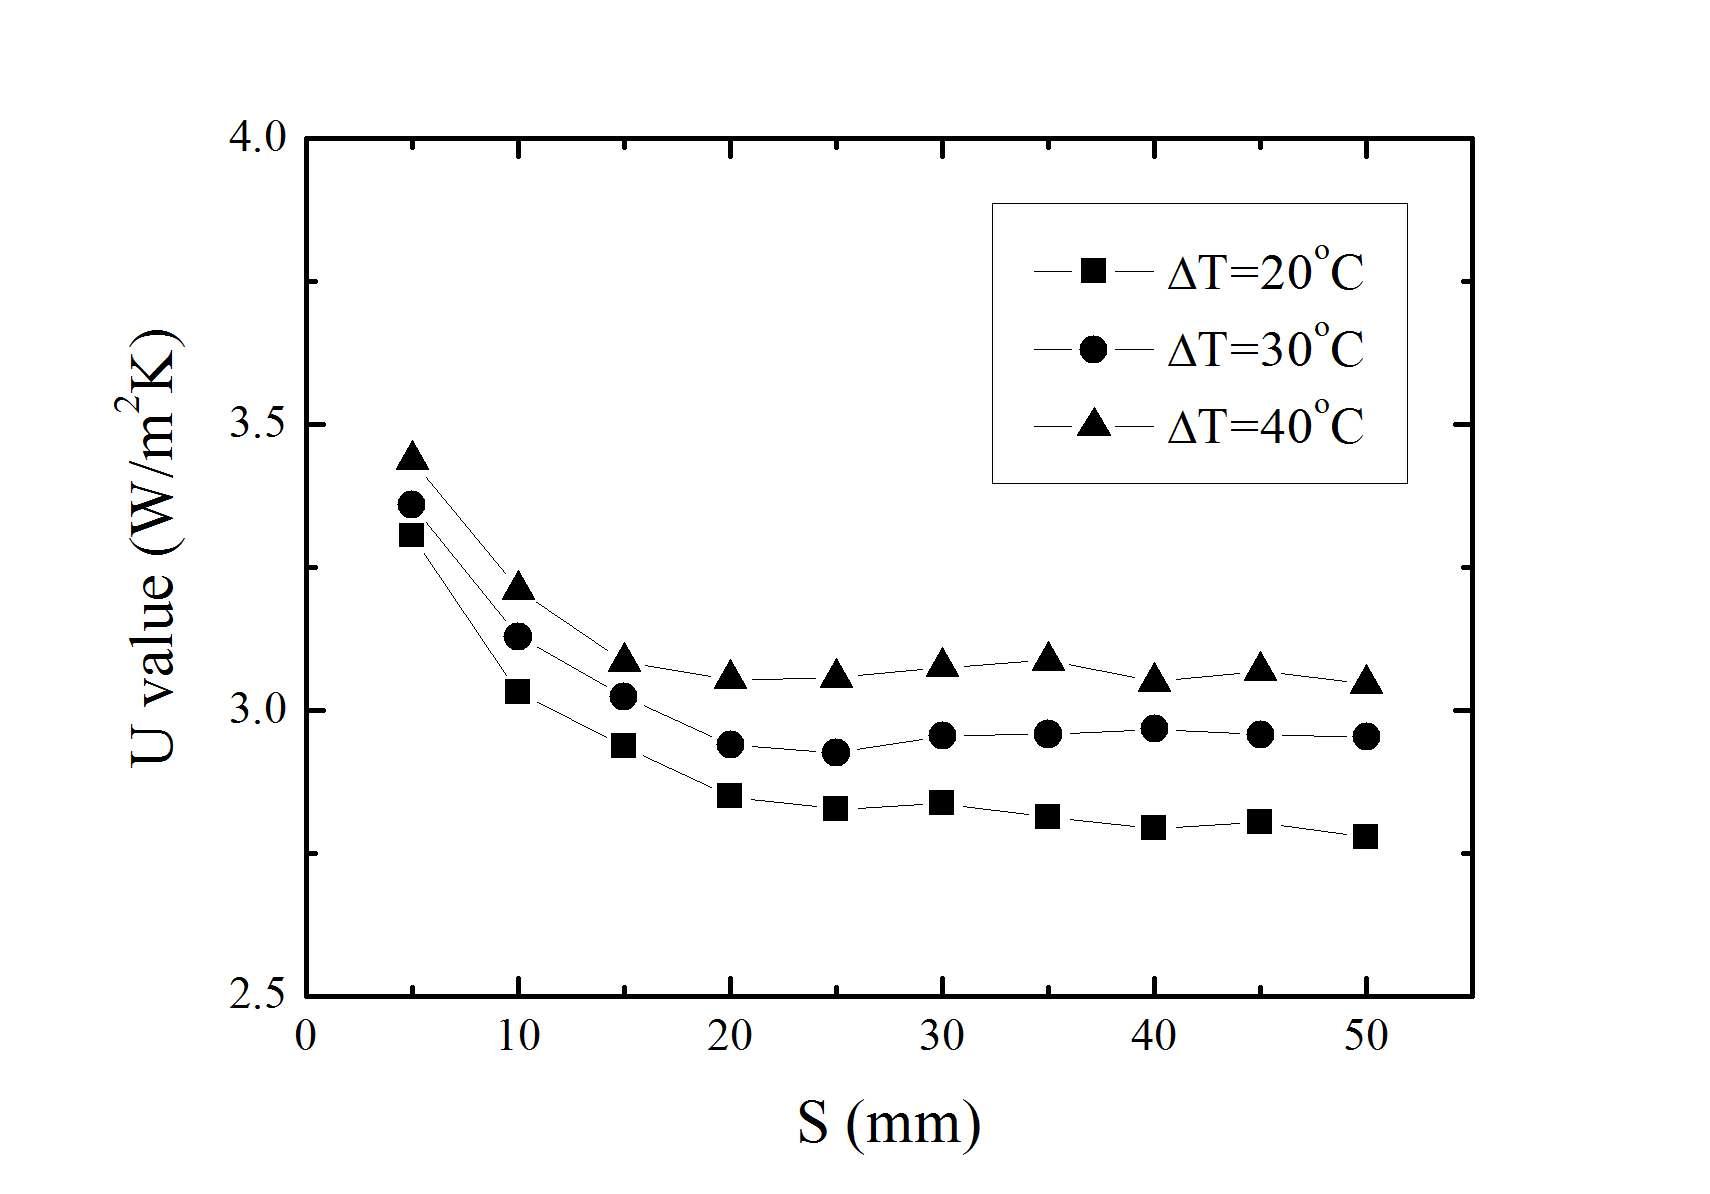 Distributions of overall heat transfer with variation of double glazing distance for temperature difference